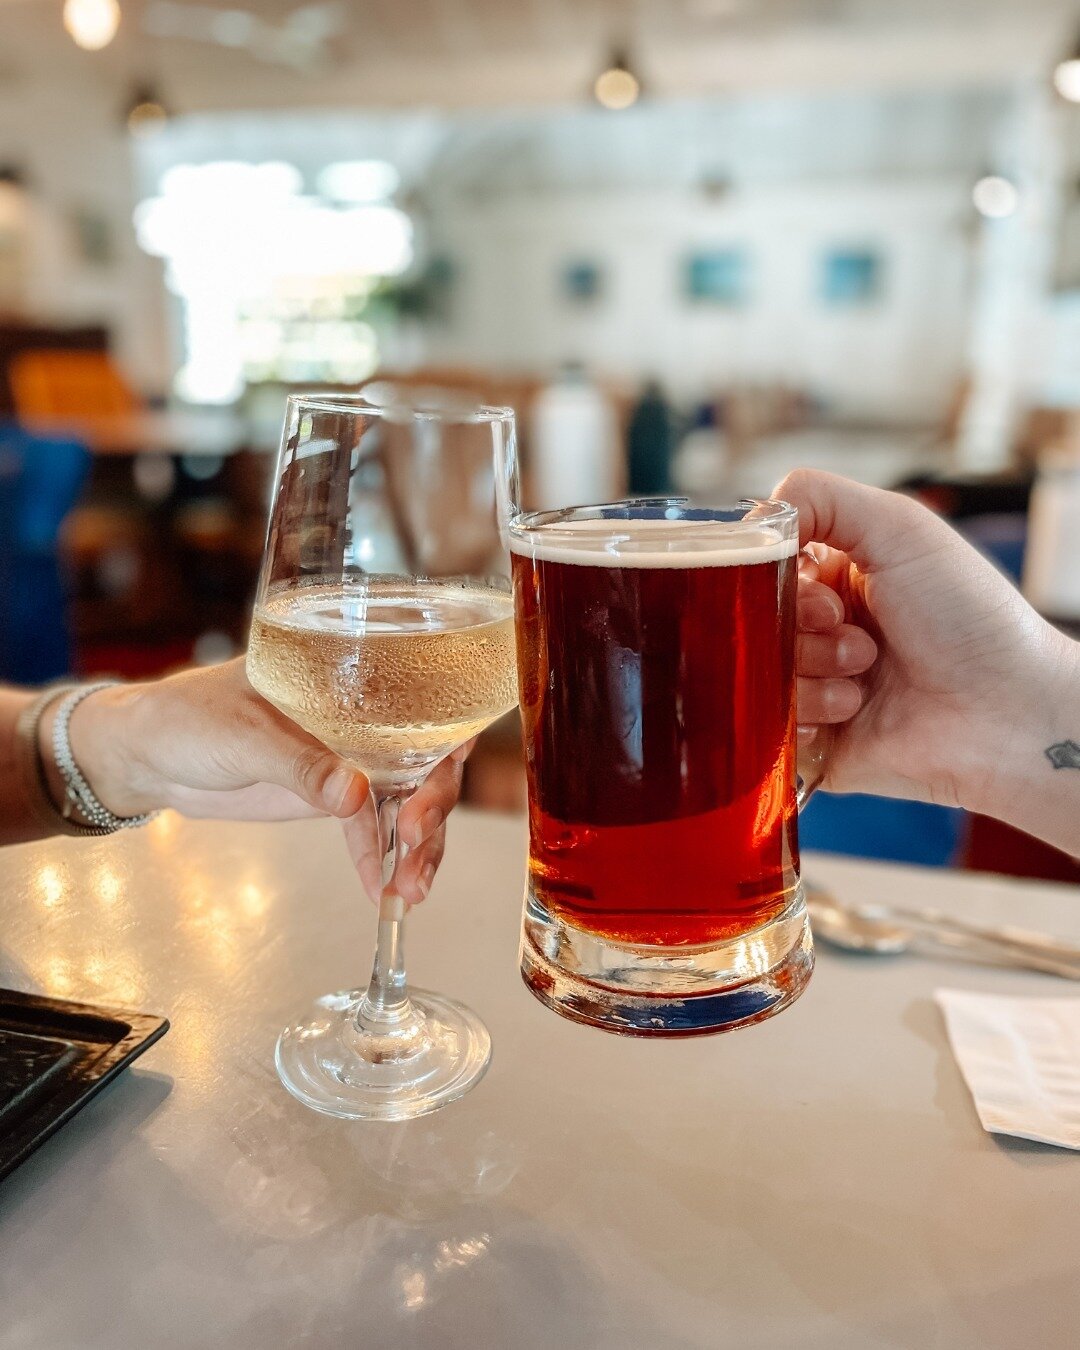 Cheers! 🍻 Which drink are you choosing? A glass of white wine or a pint of beer? Let us know in the comments!

Give us a call at (246) 432-1246, or use the link in our bio to reserve your table!

#meathouse #pub #barbados #restaurant #liveentertainm